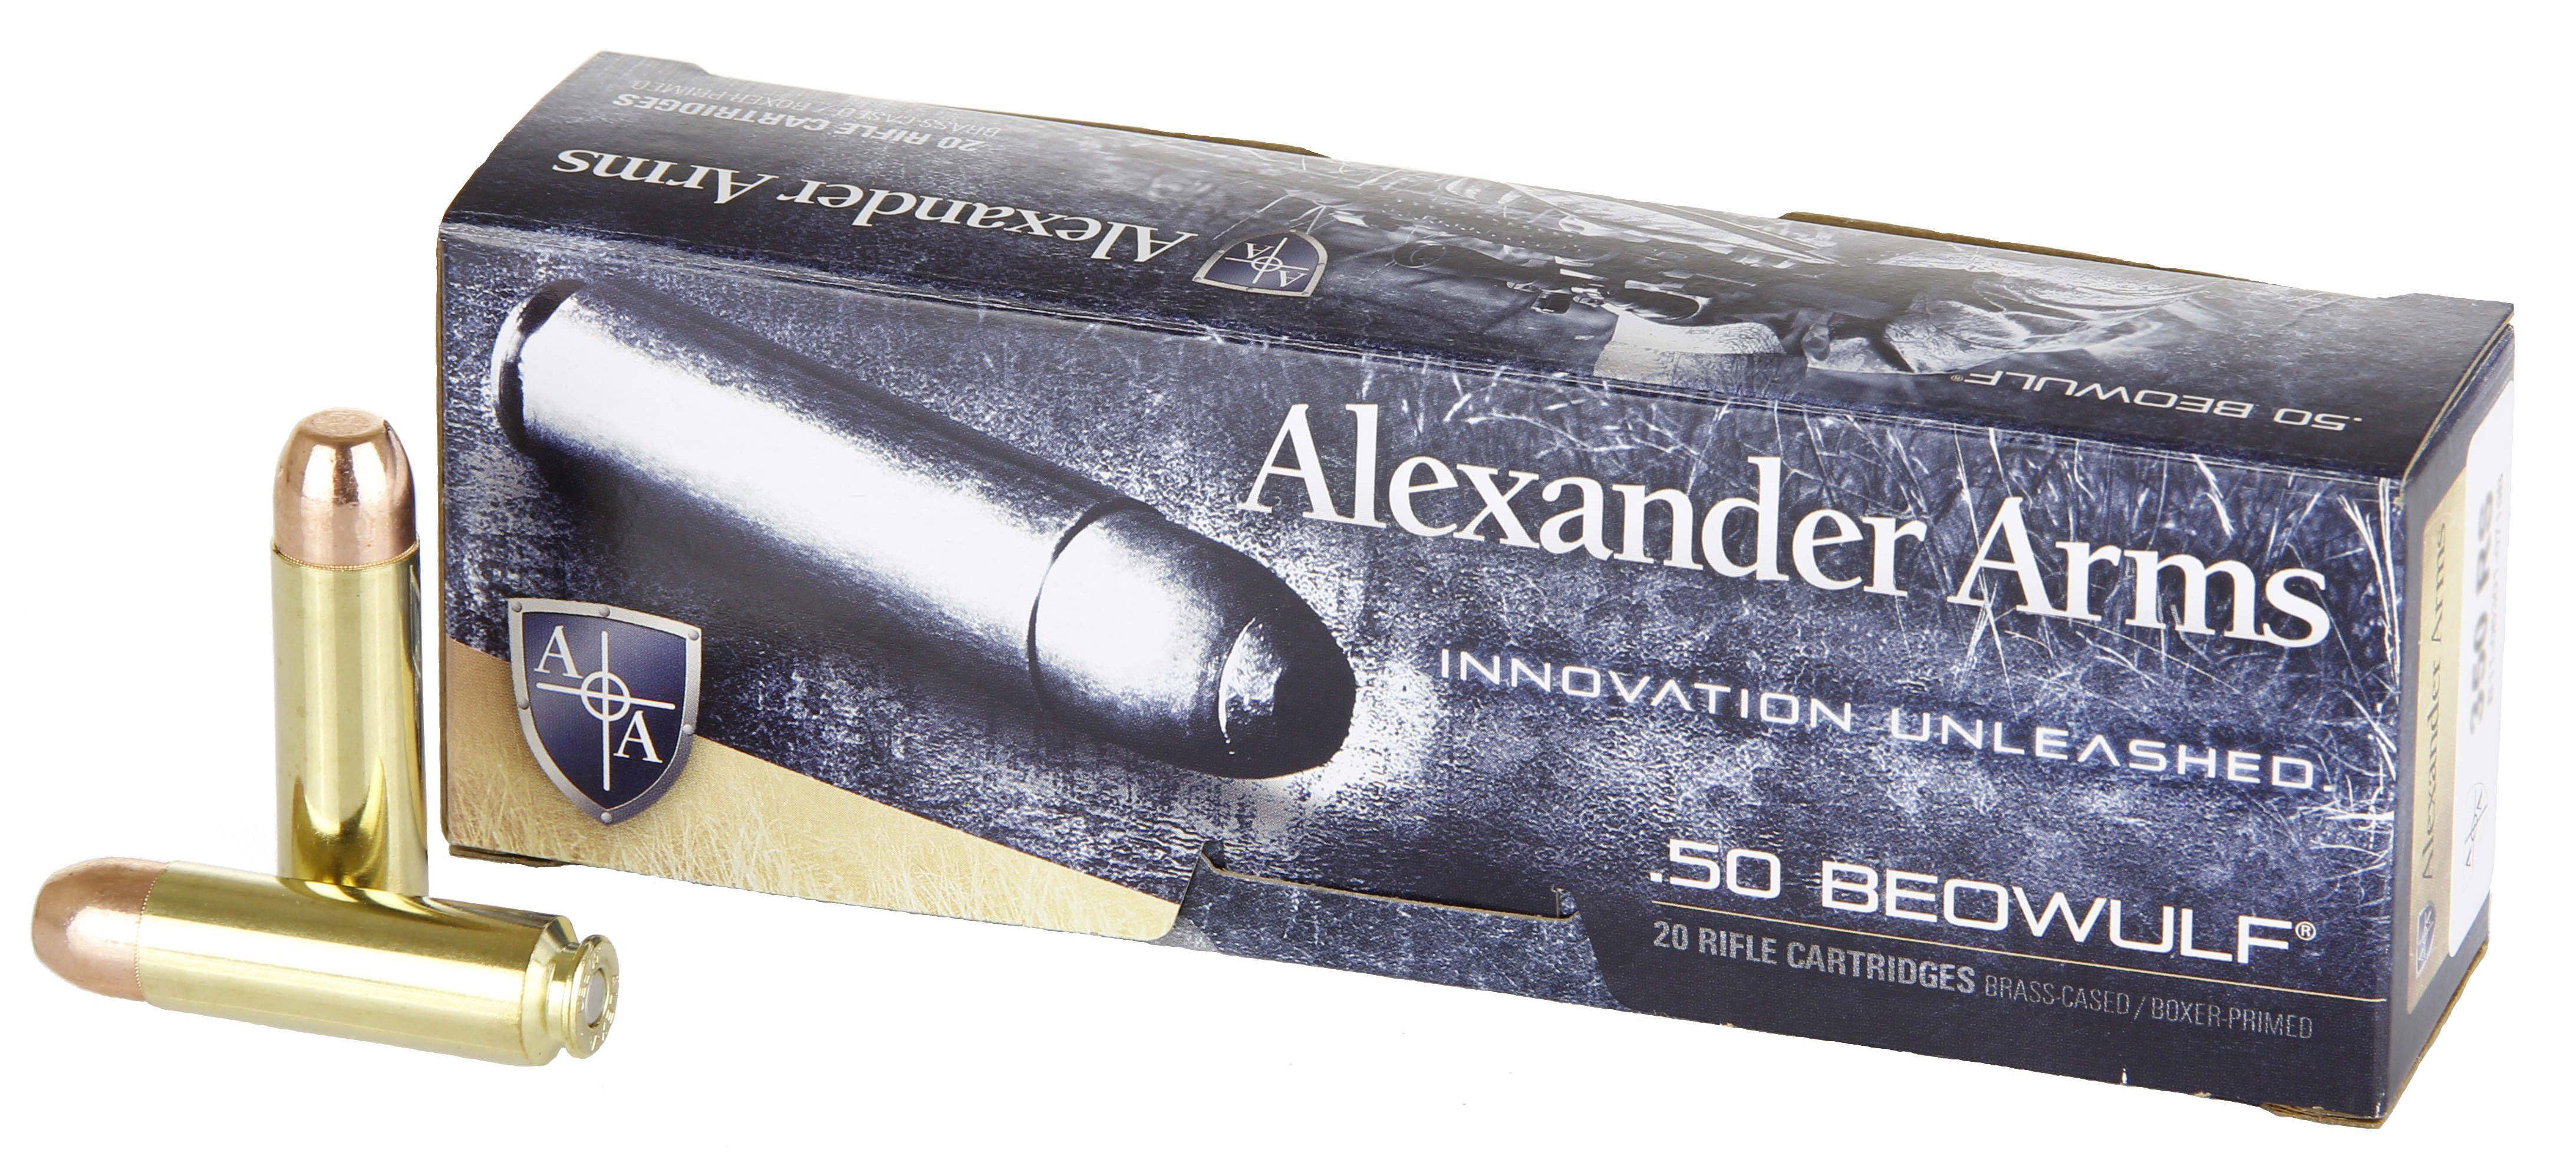 Alexander Arms Loaded Ammunition 50 Beowulf Box Of Free Shipping Over 49